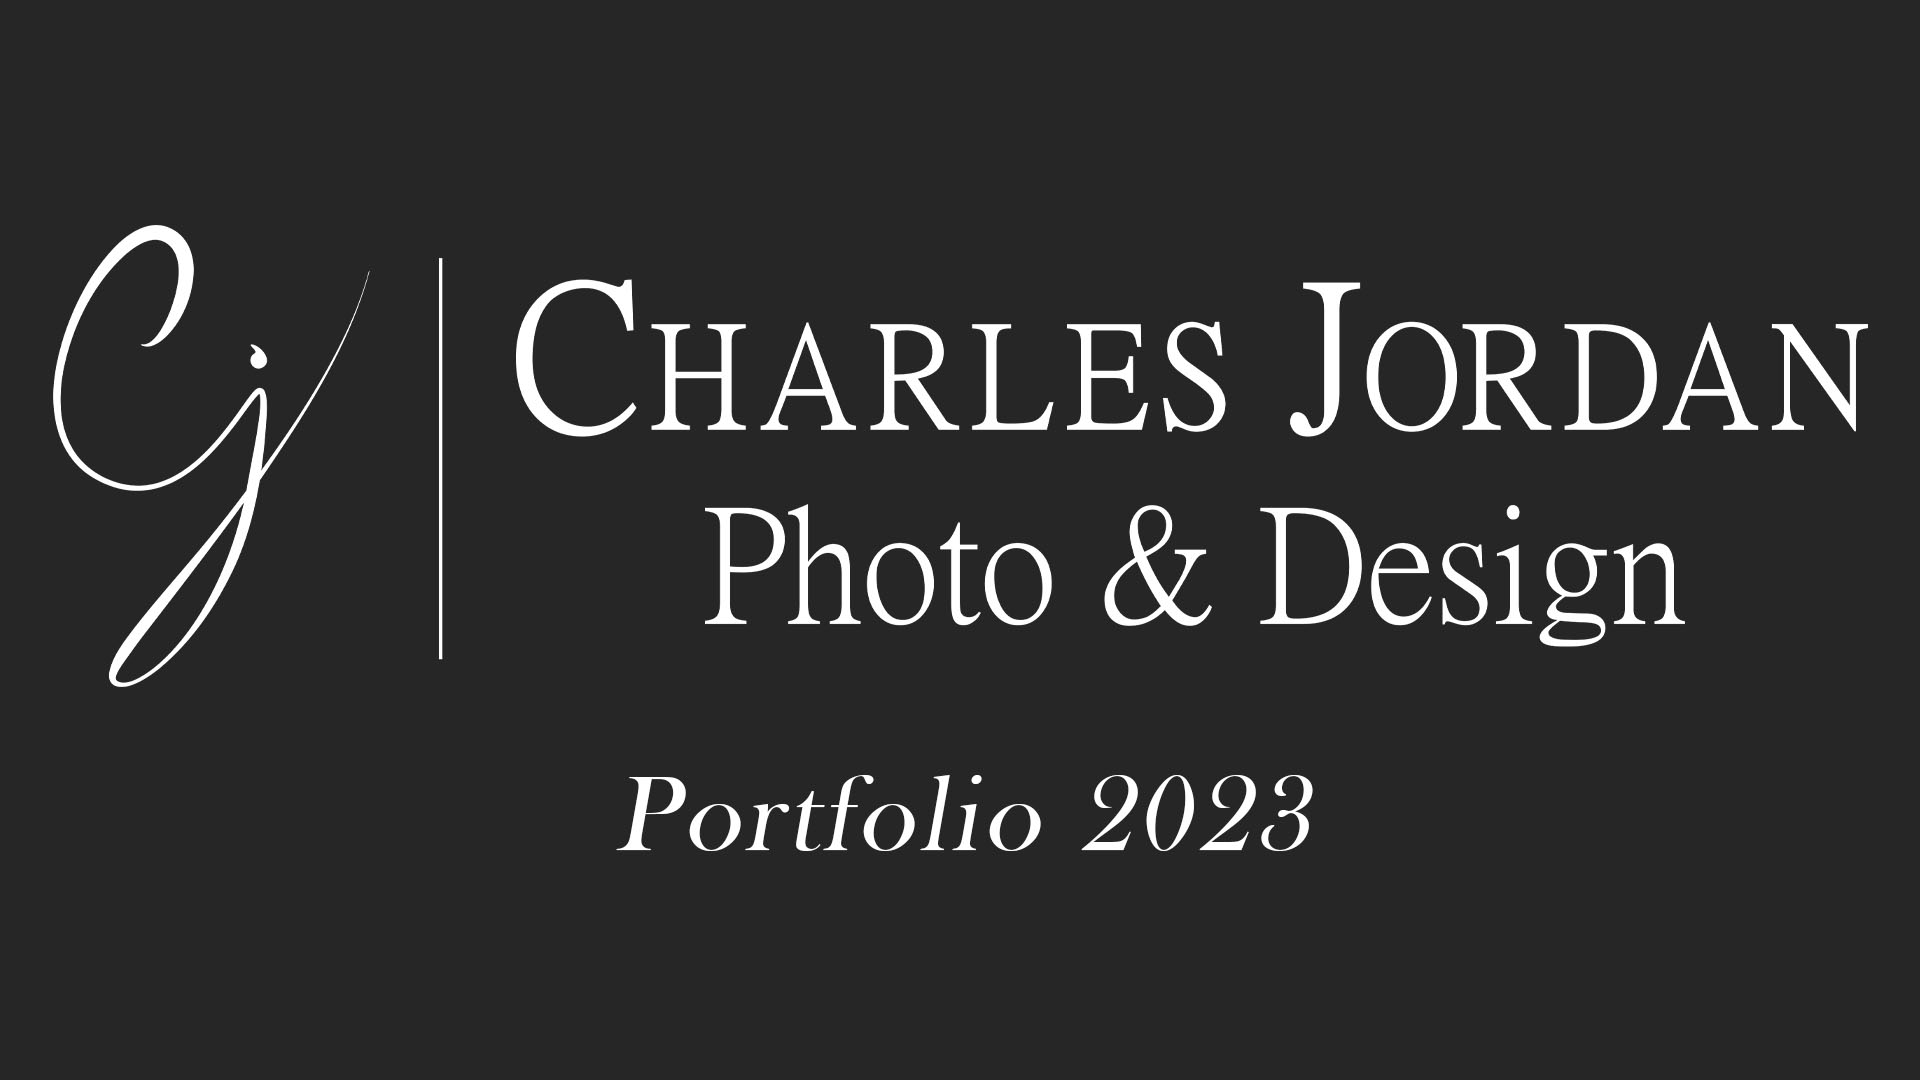 My personal logo / My personal logo representing my photography and graphic design business.